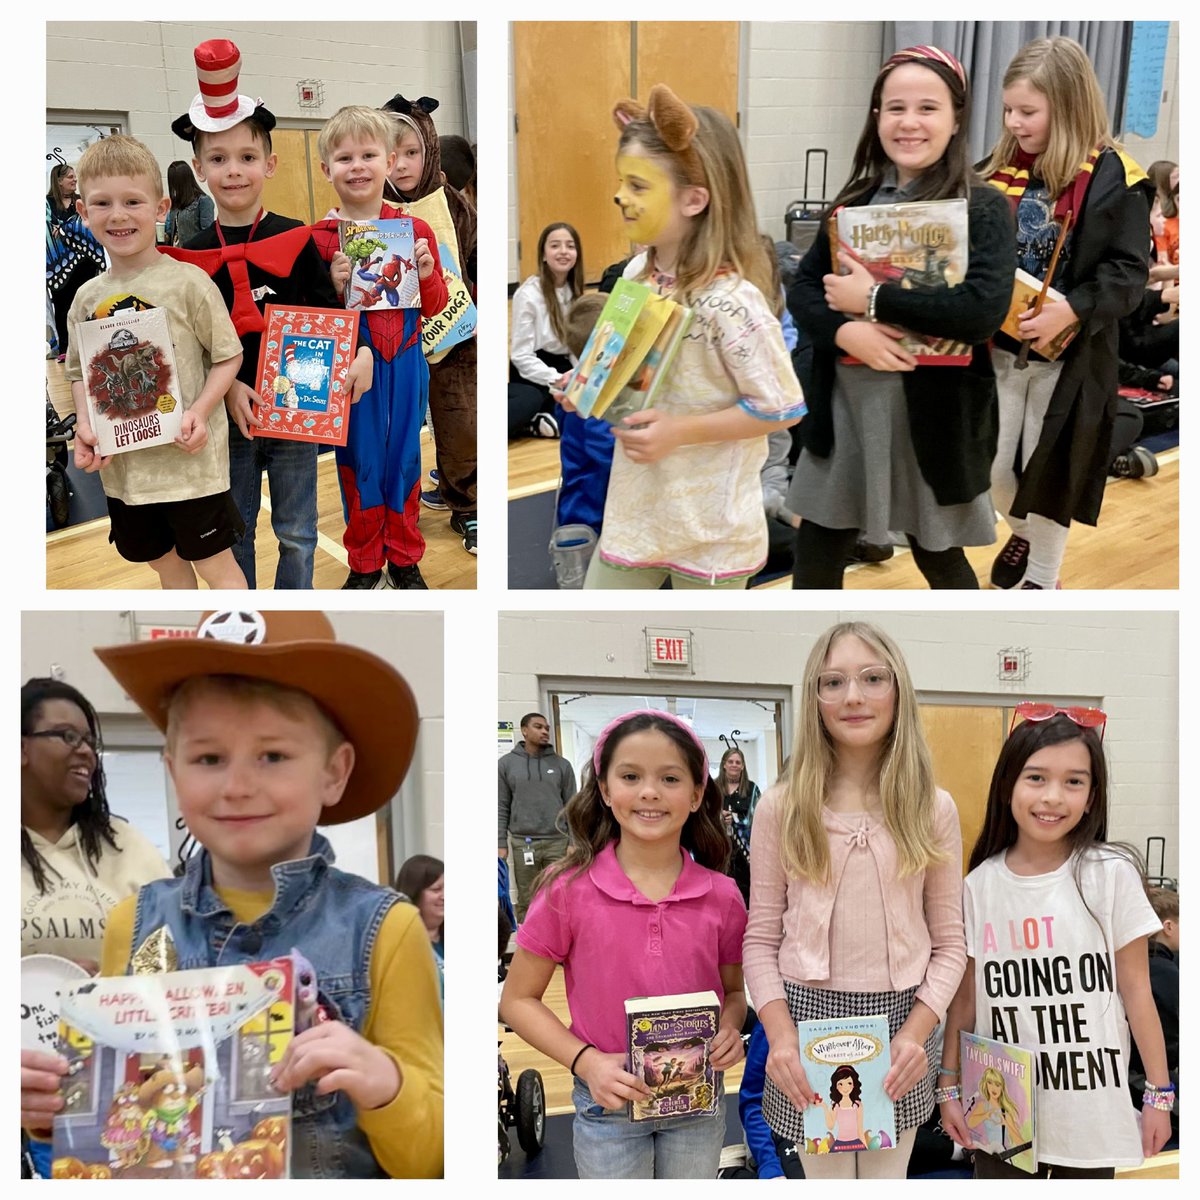 Students enjoyed dressing up as storybook characters for our Storybook Character Parade on Monday for Read Across America! #DareToDive #MakeASplash @LindsayNKidd @linz_kurtz @RMinor9